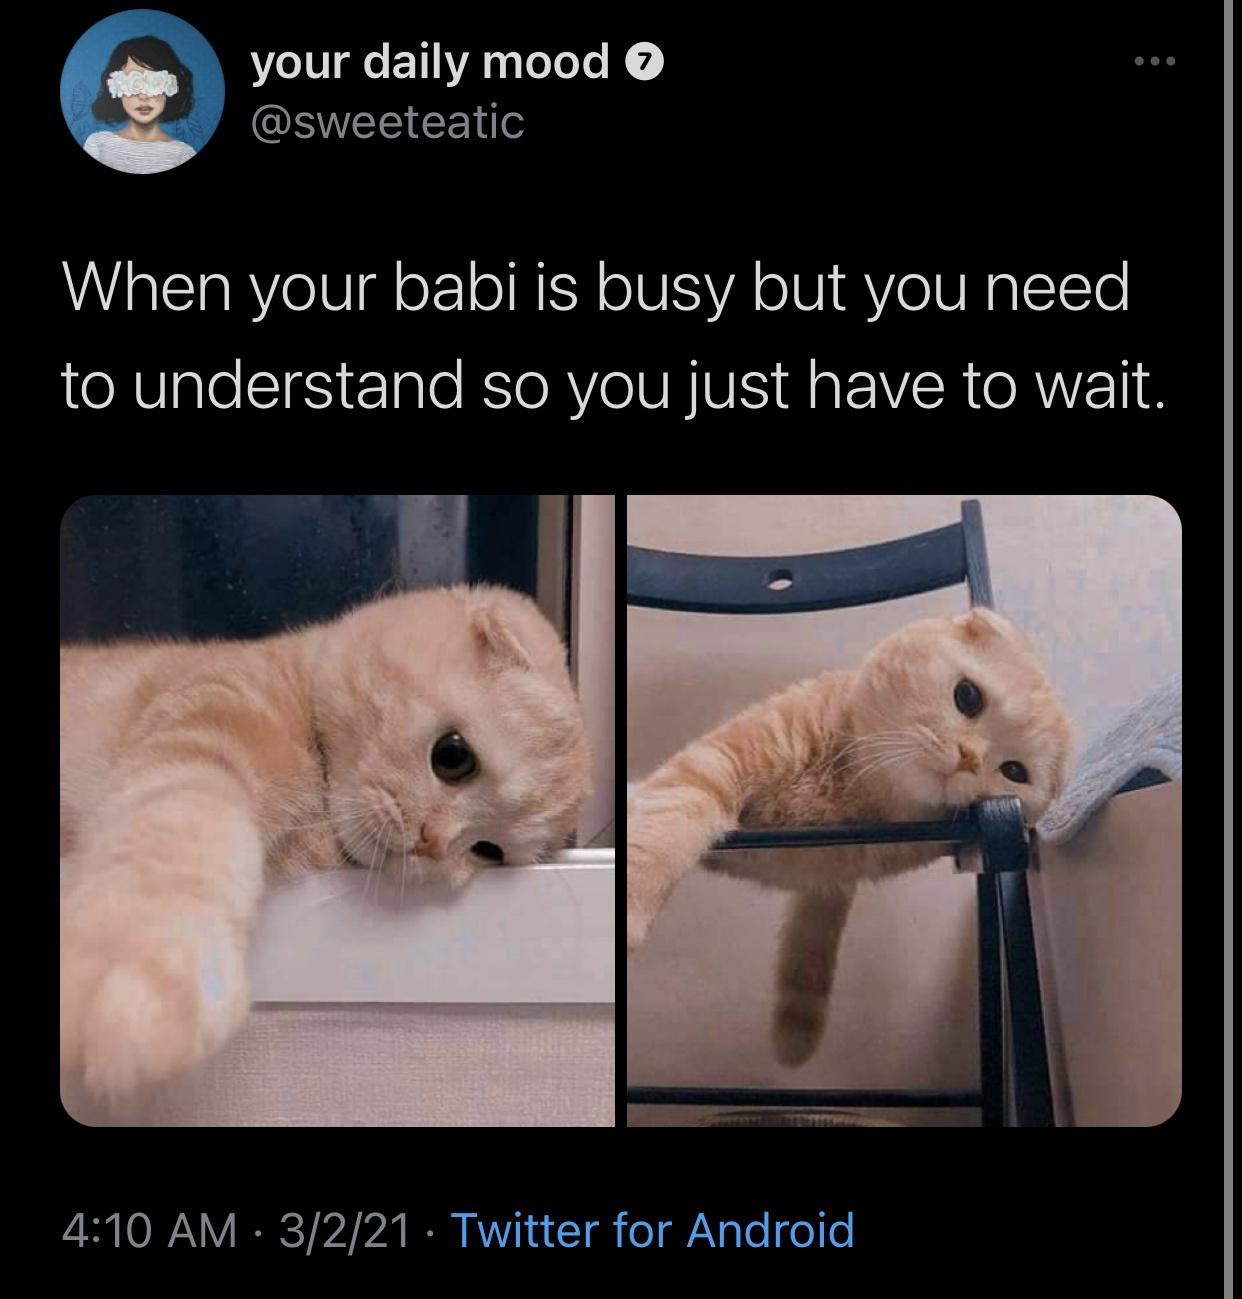 the funniest tweets - your daily mood When your babi is busy but you need to understand so you just have to wait. 3221 Twitter for Android